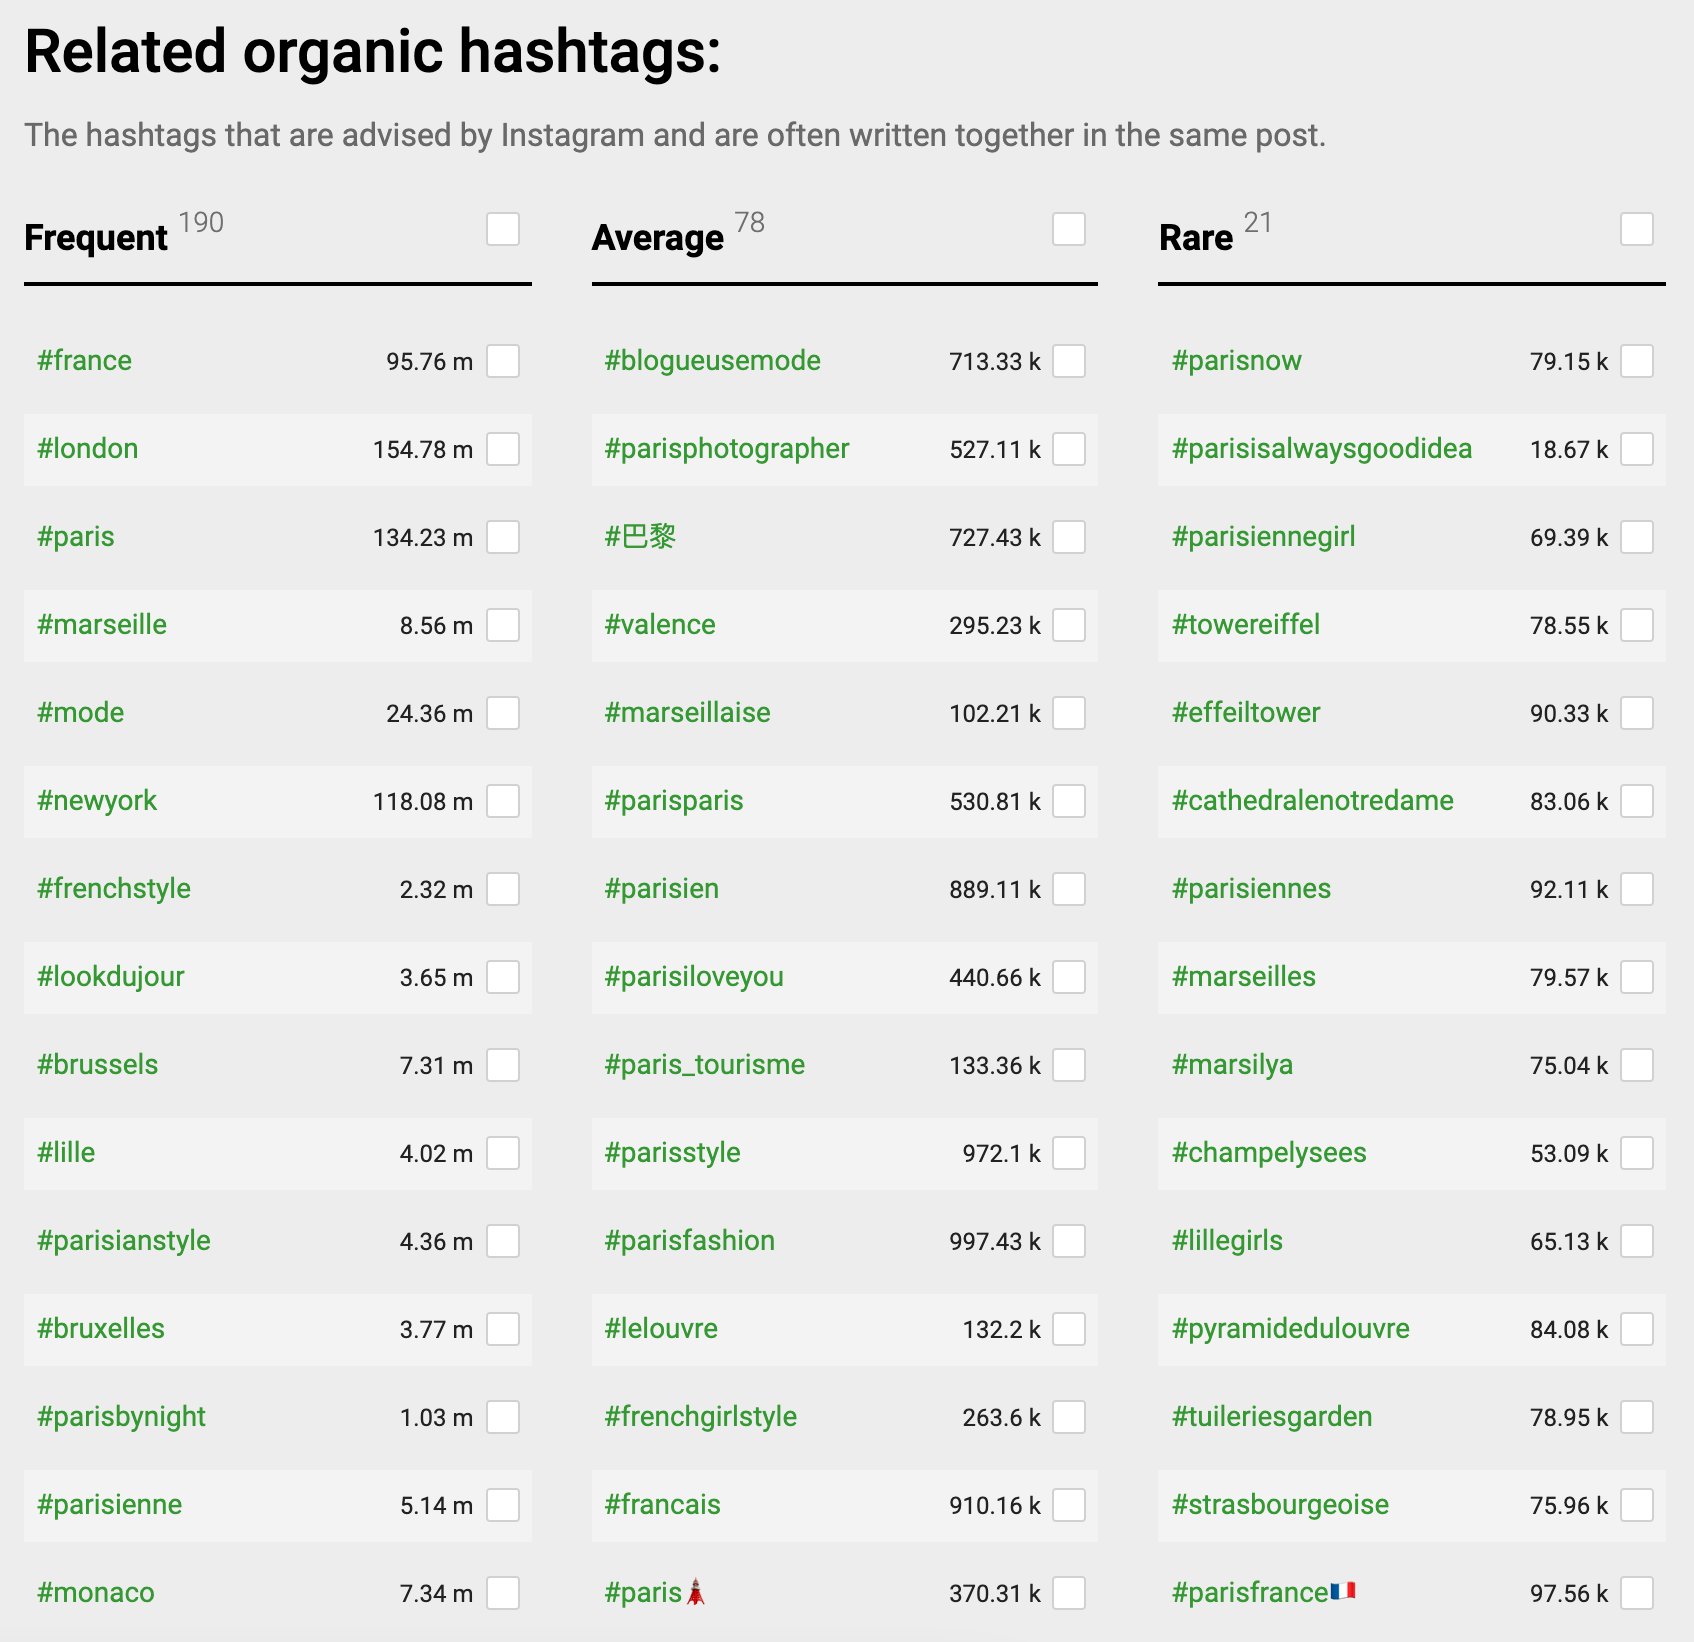 Inflact AI's results for related organic hashtags and how often each is used.